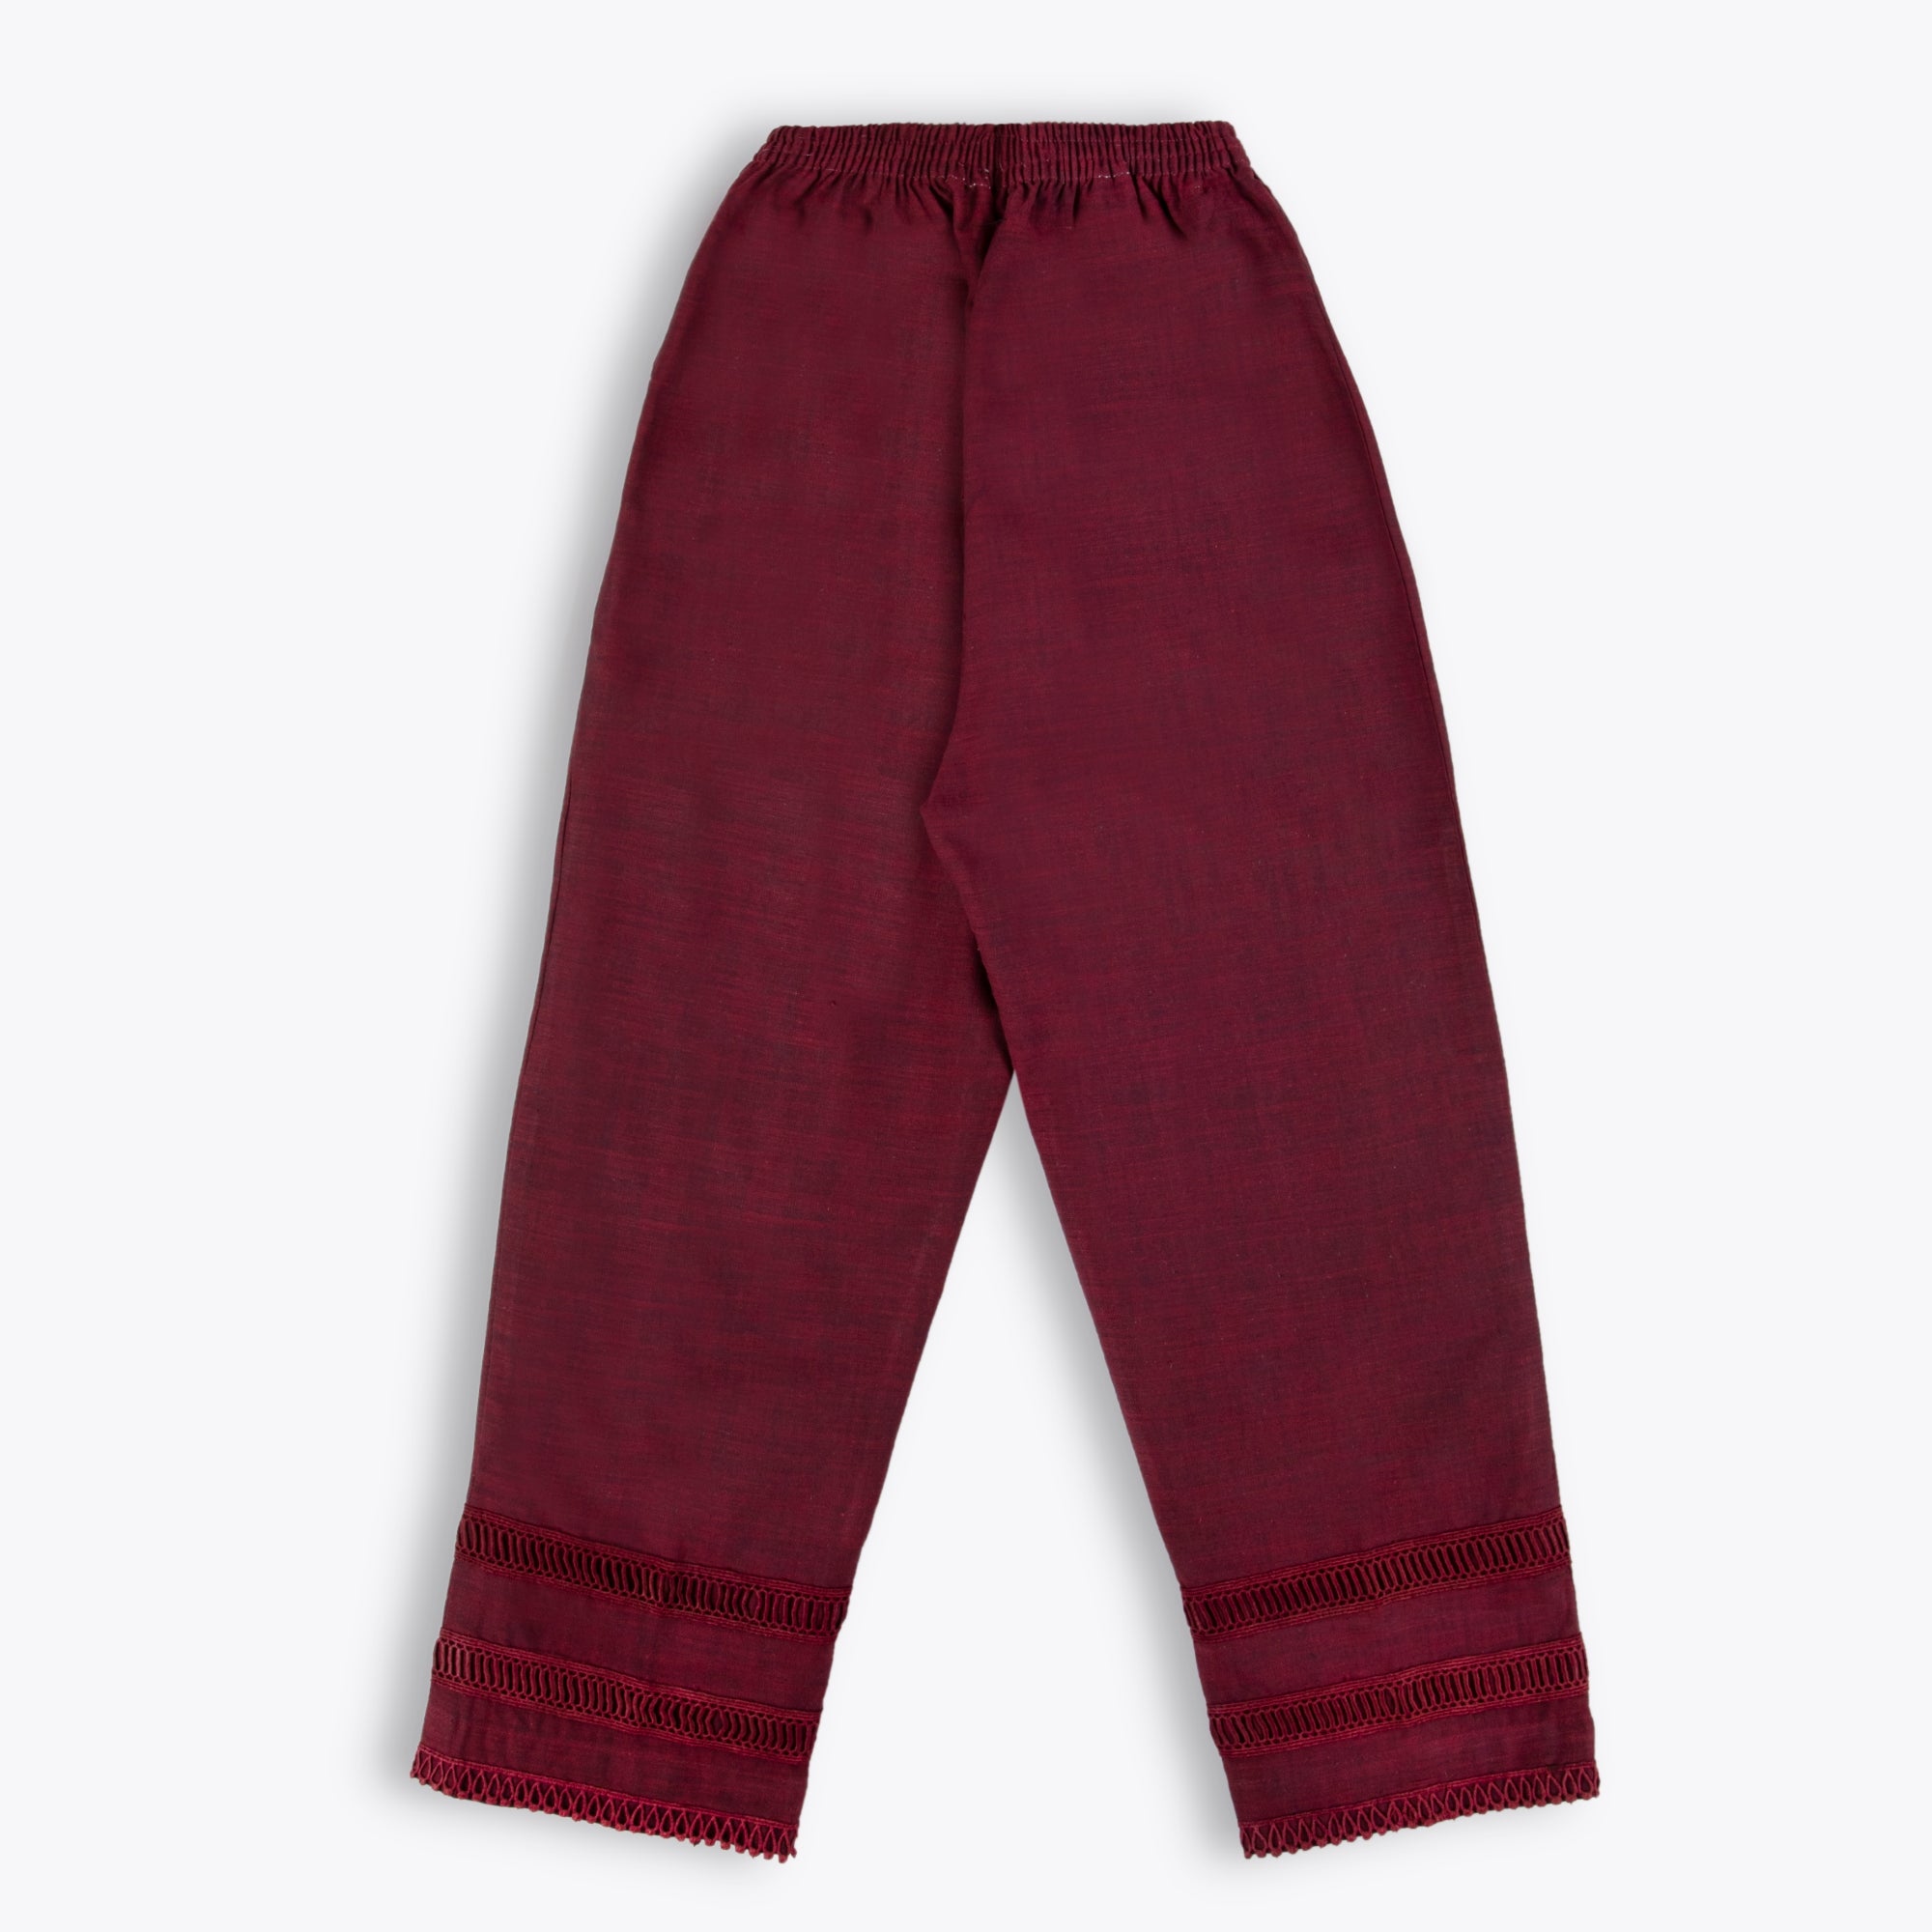 Thick Maroon Cotton Trousers